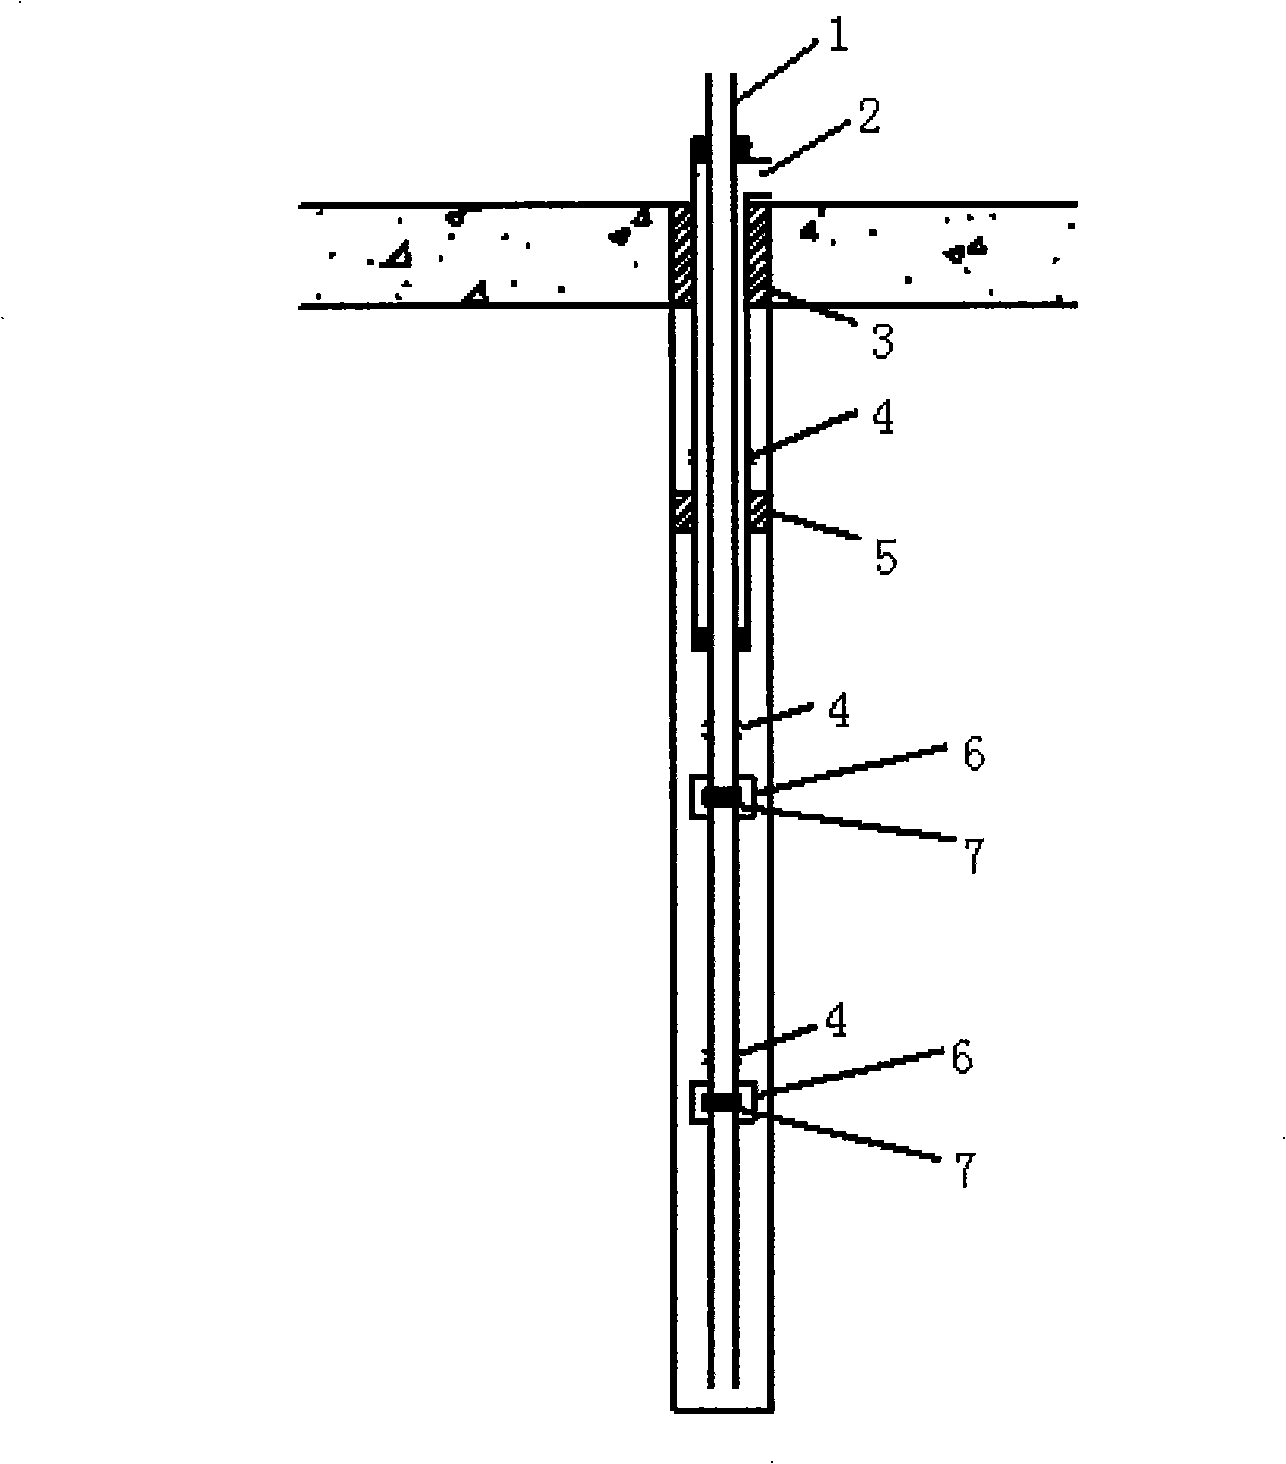 Consolidated grouting method for anchoring cement of bedrock contact segment